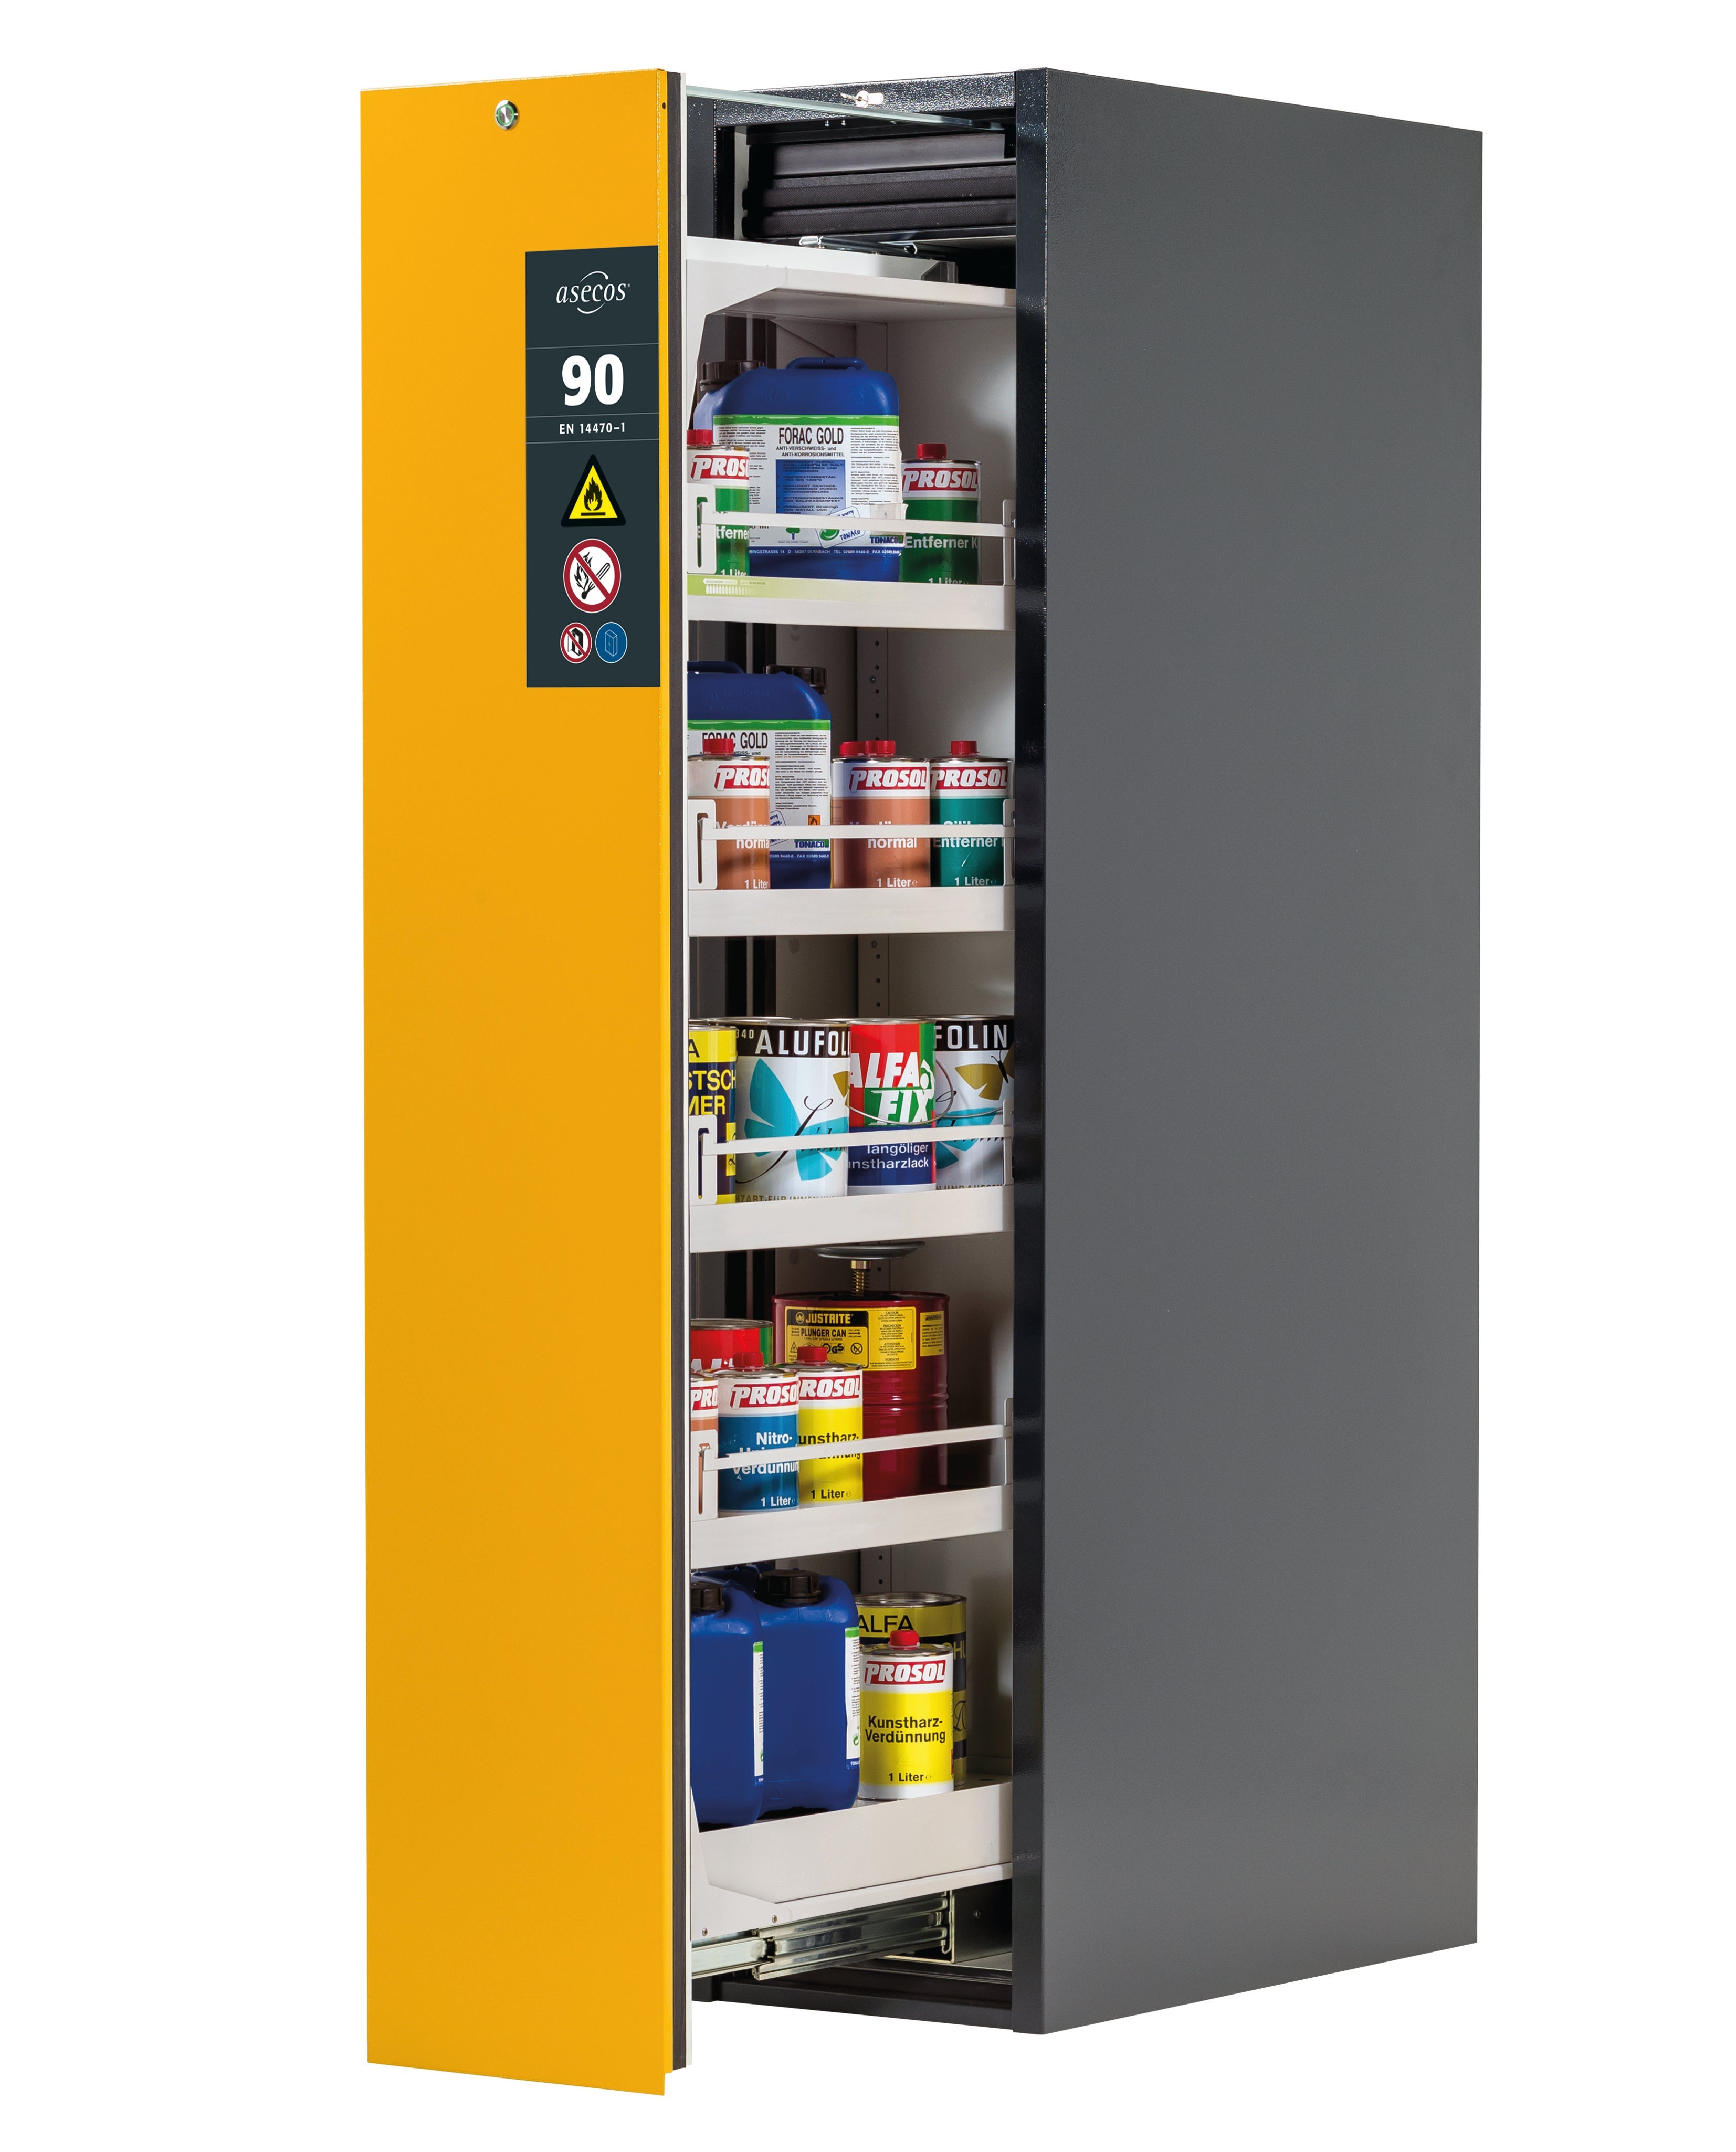 Type 90 safety cabinet V-MOVE-90 model V90.196.045.VDAC:0013 in safety yellow RAL 1004 with 4x standard tray base (sheet steel)